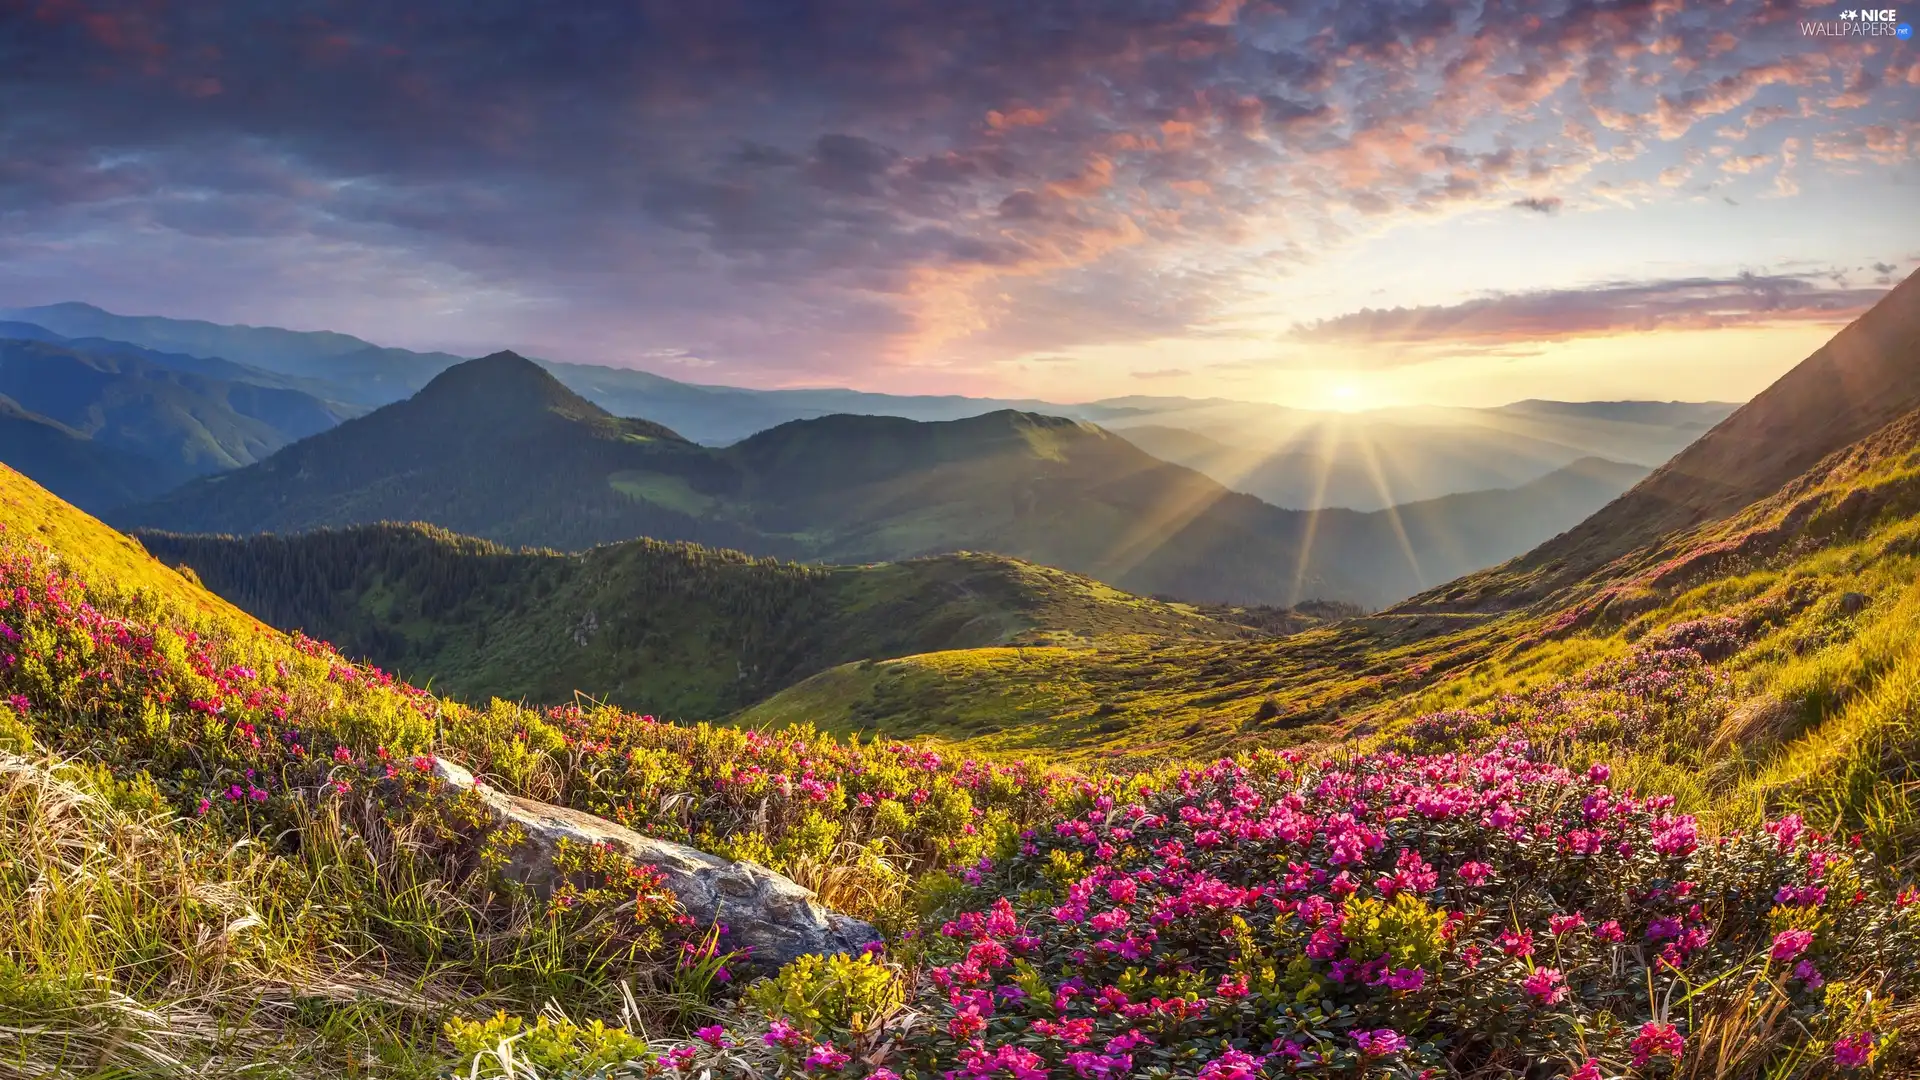 Flowers, Mountains, car in the meadow, Sunrise, grass, clouds